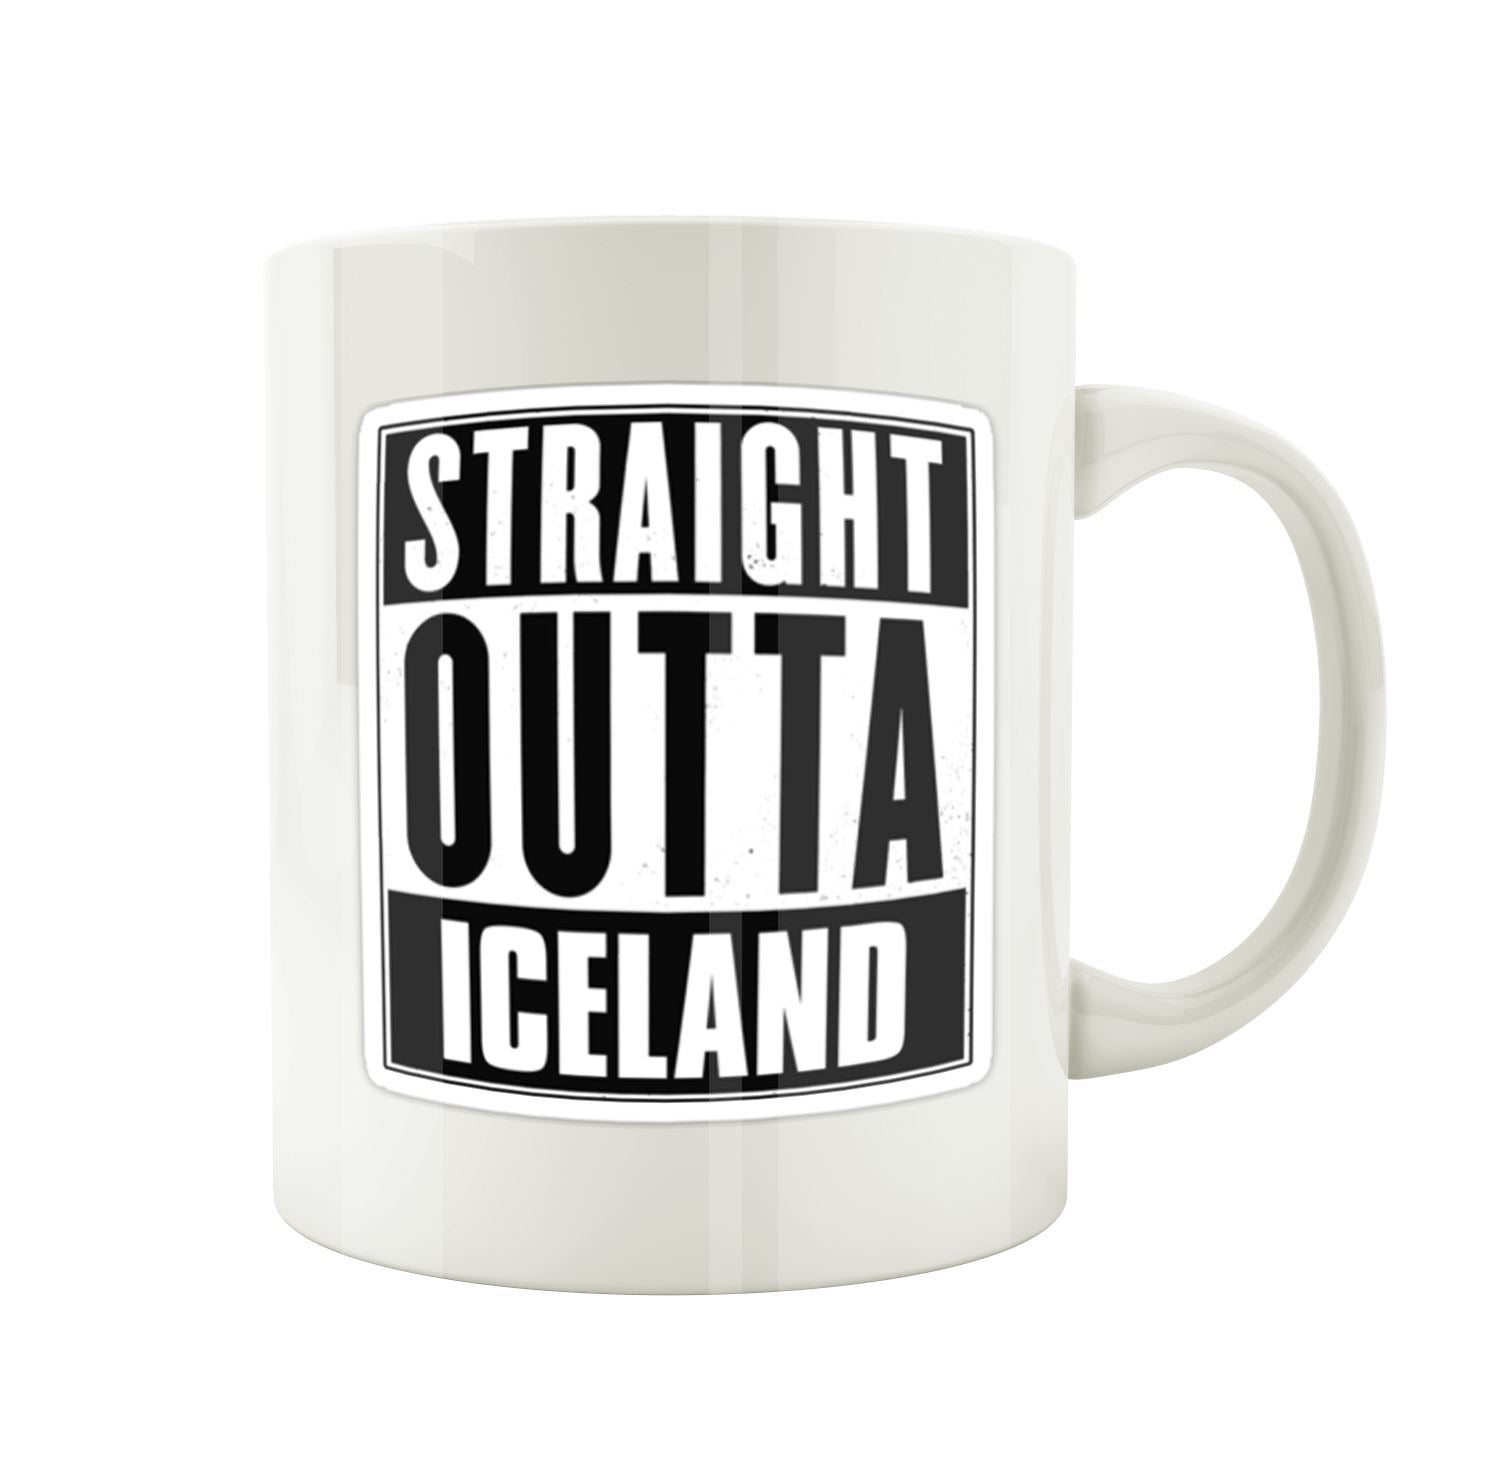 Straight outta iceland